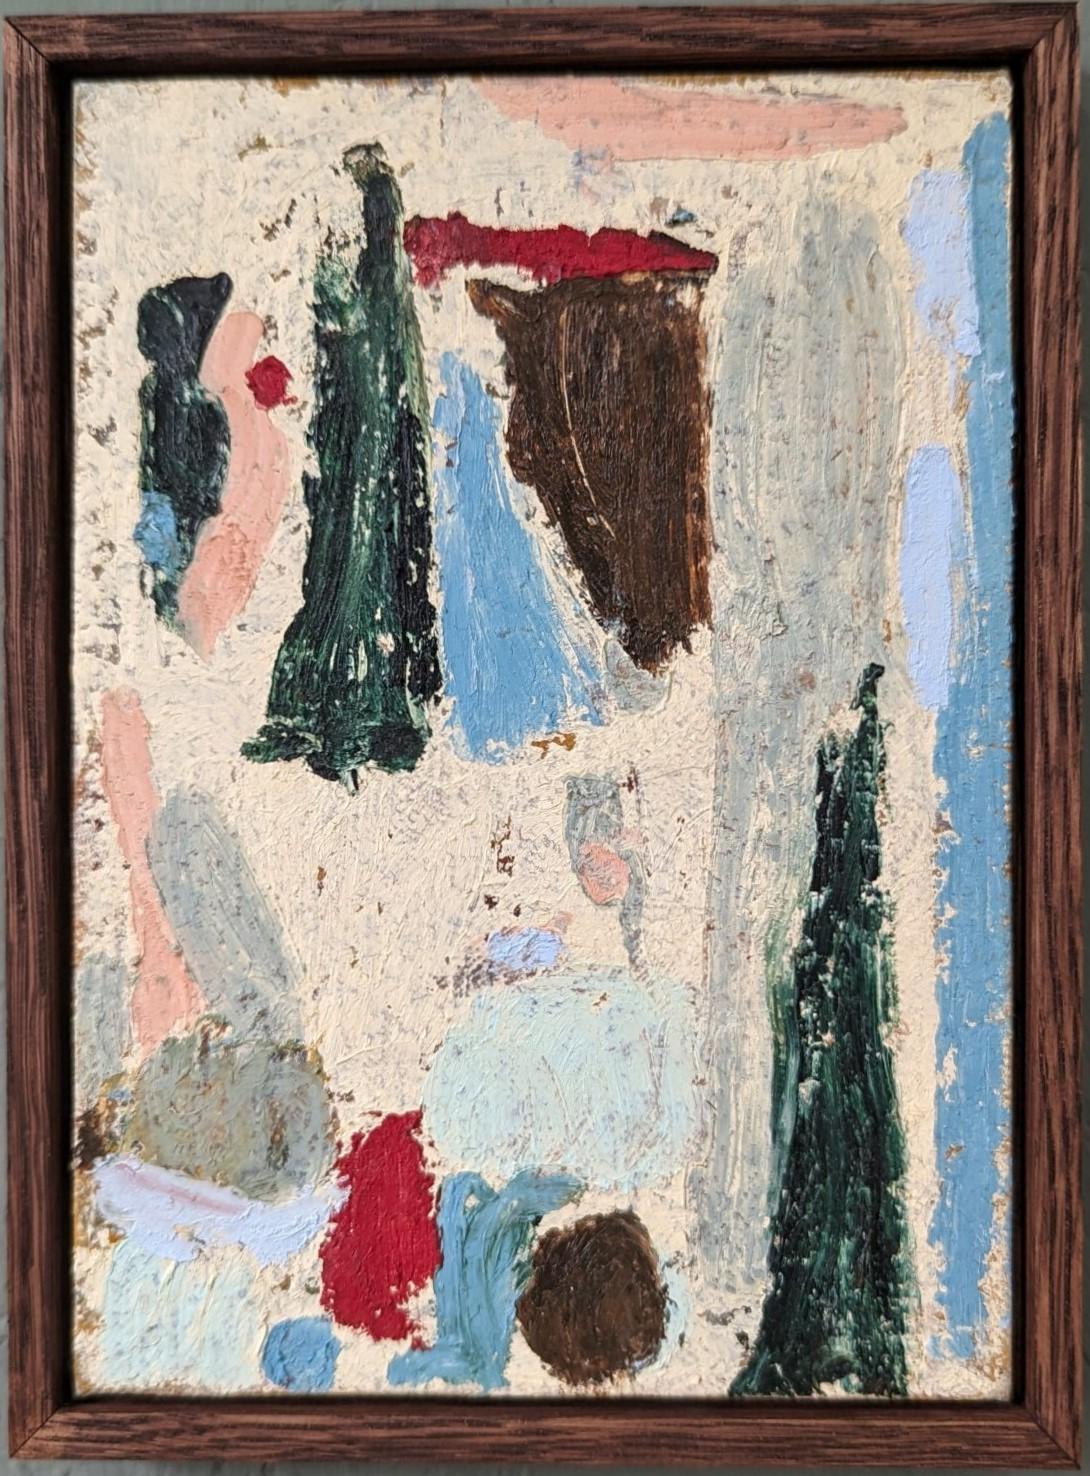 COLLECTED FICTIONS
Size: 20 x 15 cm (including frame)
Oil on linen panel

A small but powerful abstract composition by British artist Lloyd Durling, painted in oil onto linen panel. Signed, titled and dated on reverse.

Central to this painting is